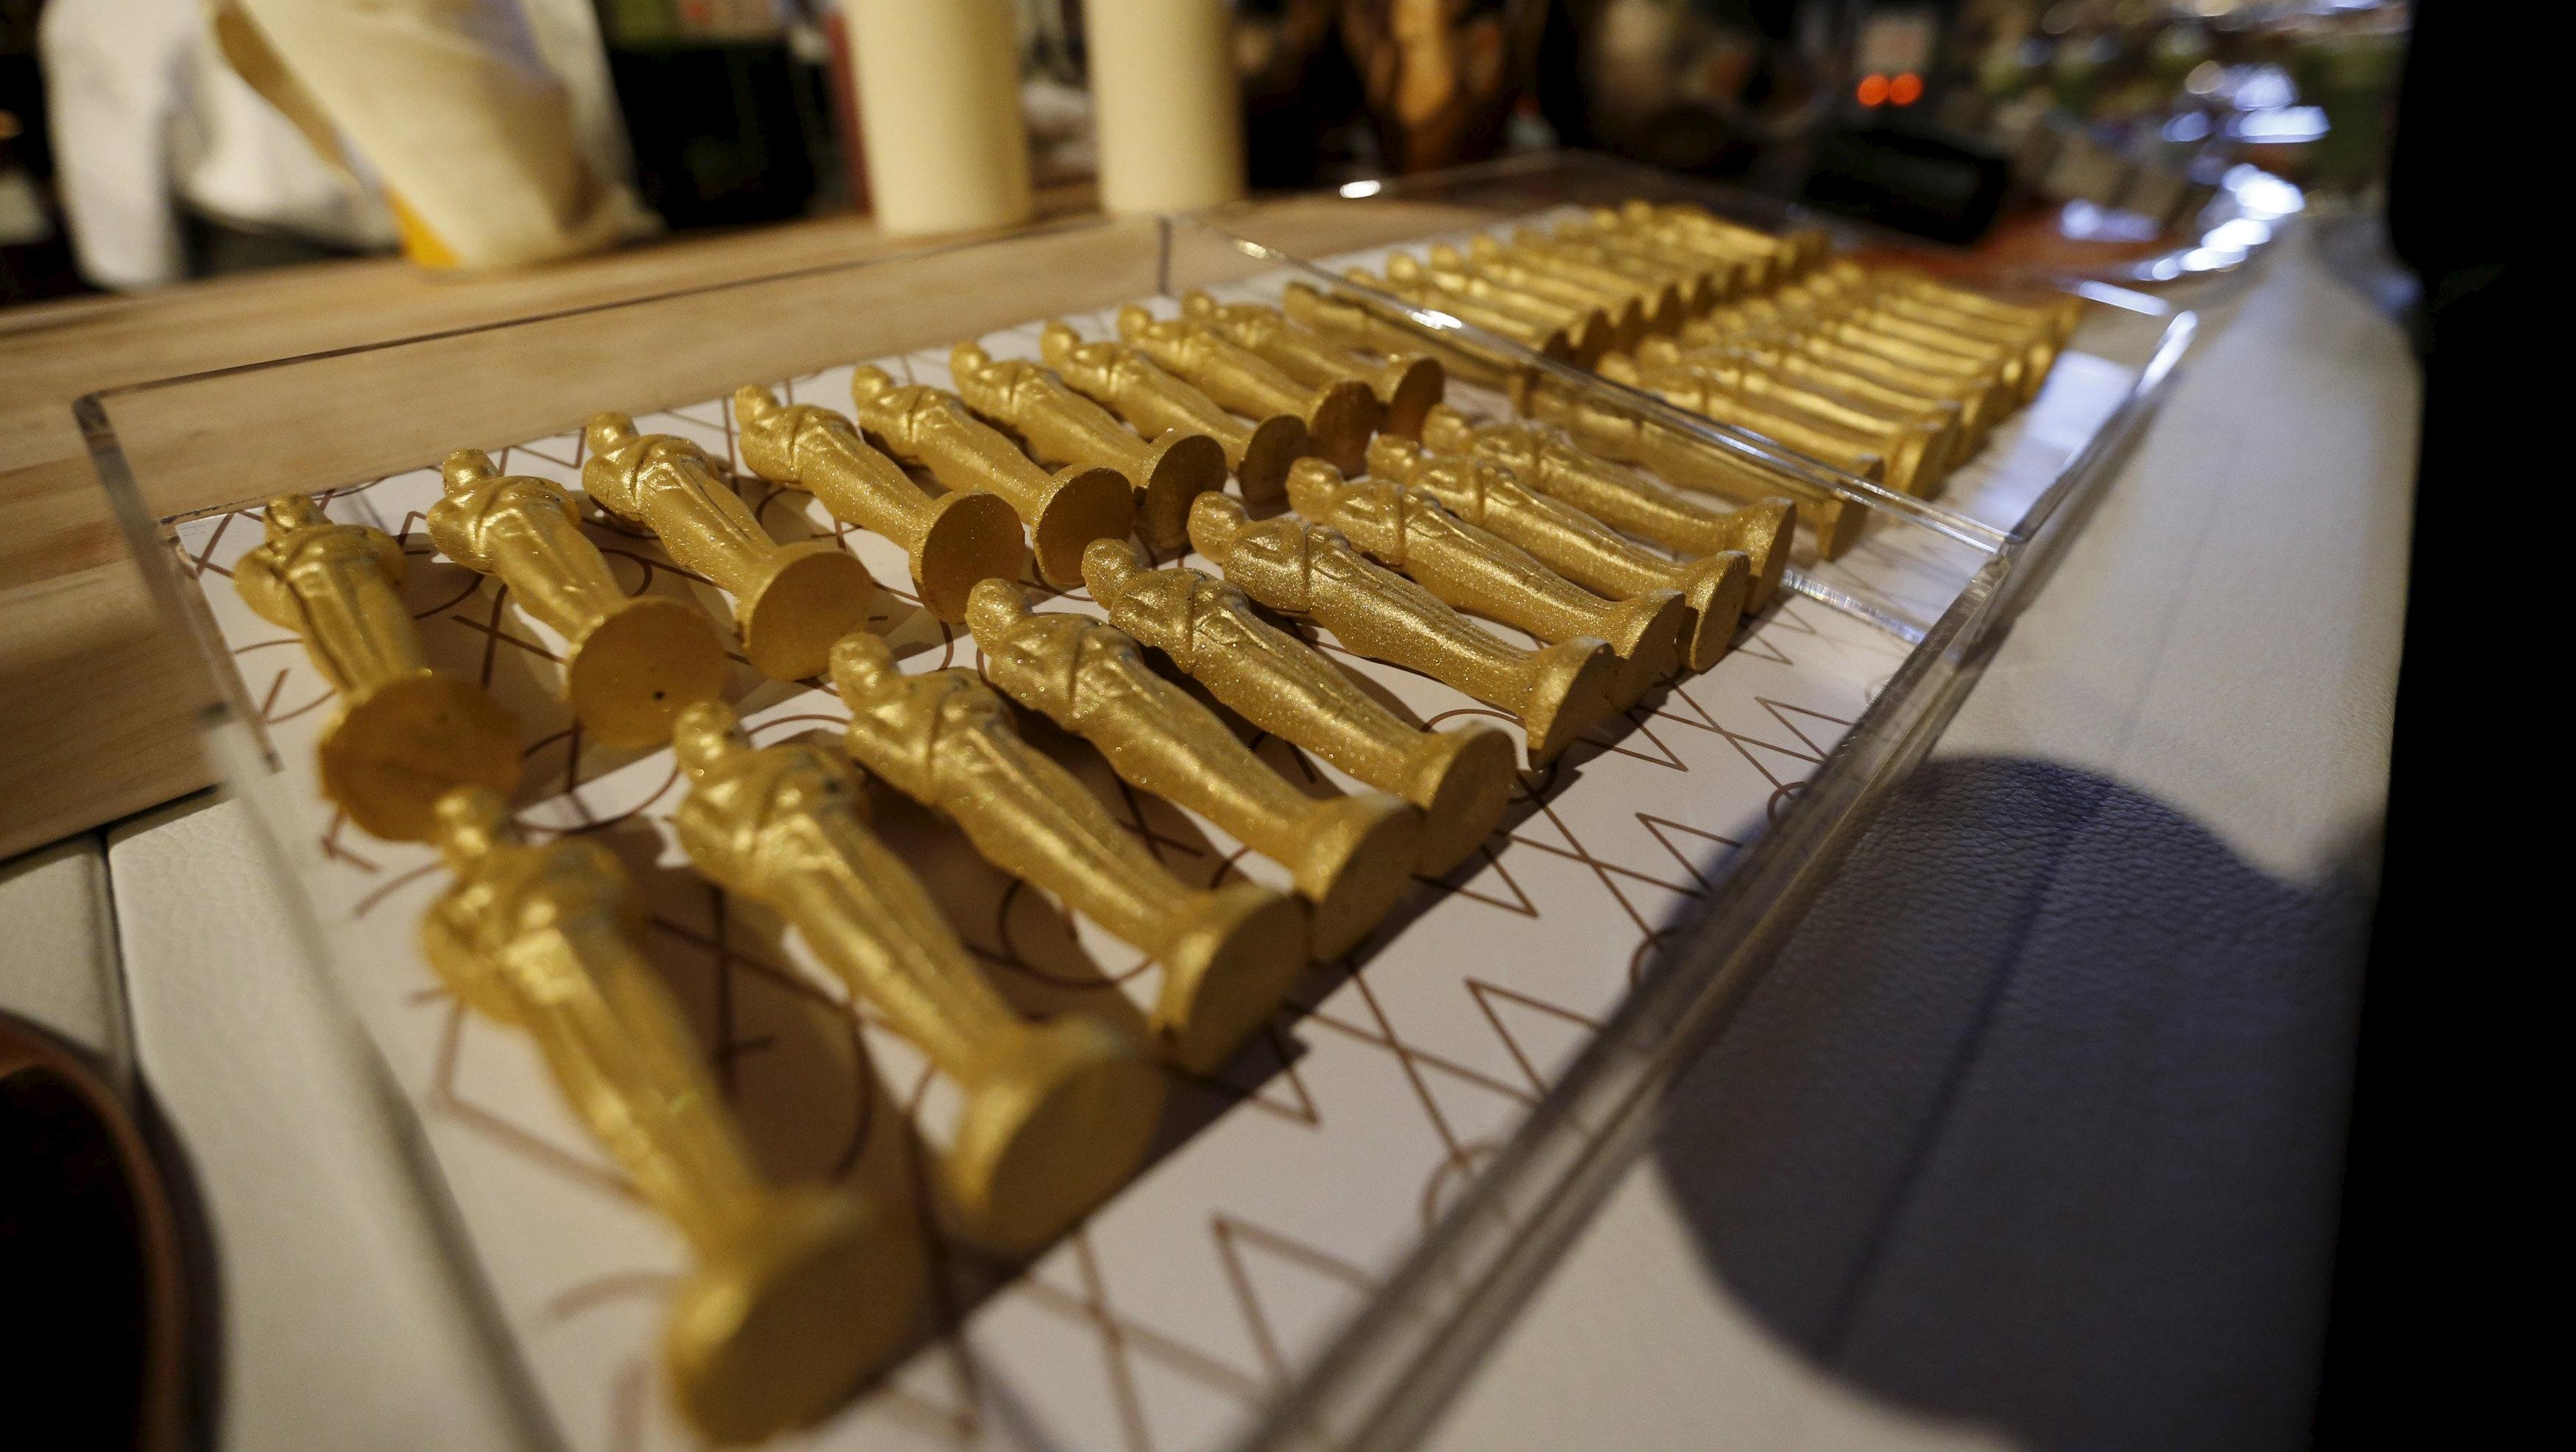 Oscar shaped chocolates are on display during a preview of the food and decor for the 88th Academy Awards' Governors Ball at the Ray Dolby ballroom in Hollywood, California Feb. 18, 2016